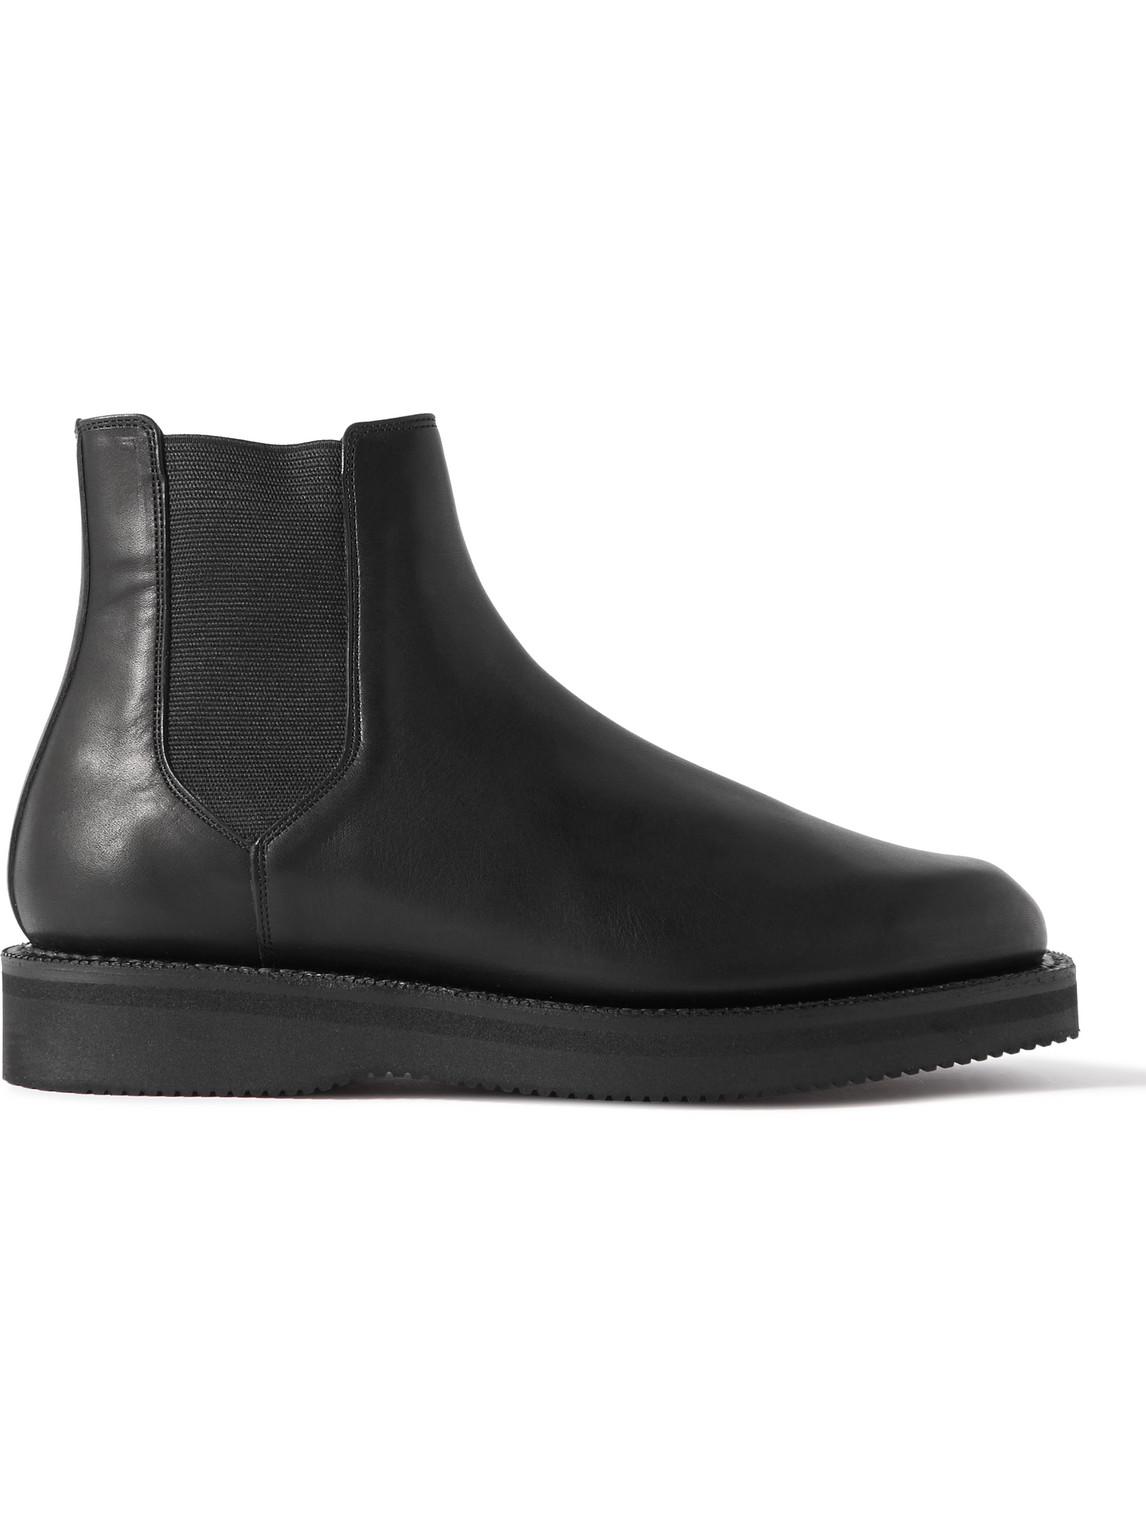 AURALEE Leather Chelsea Boots in Black for Men | Lyst